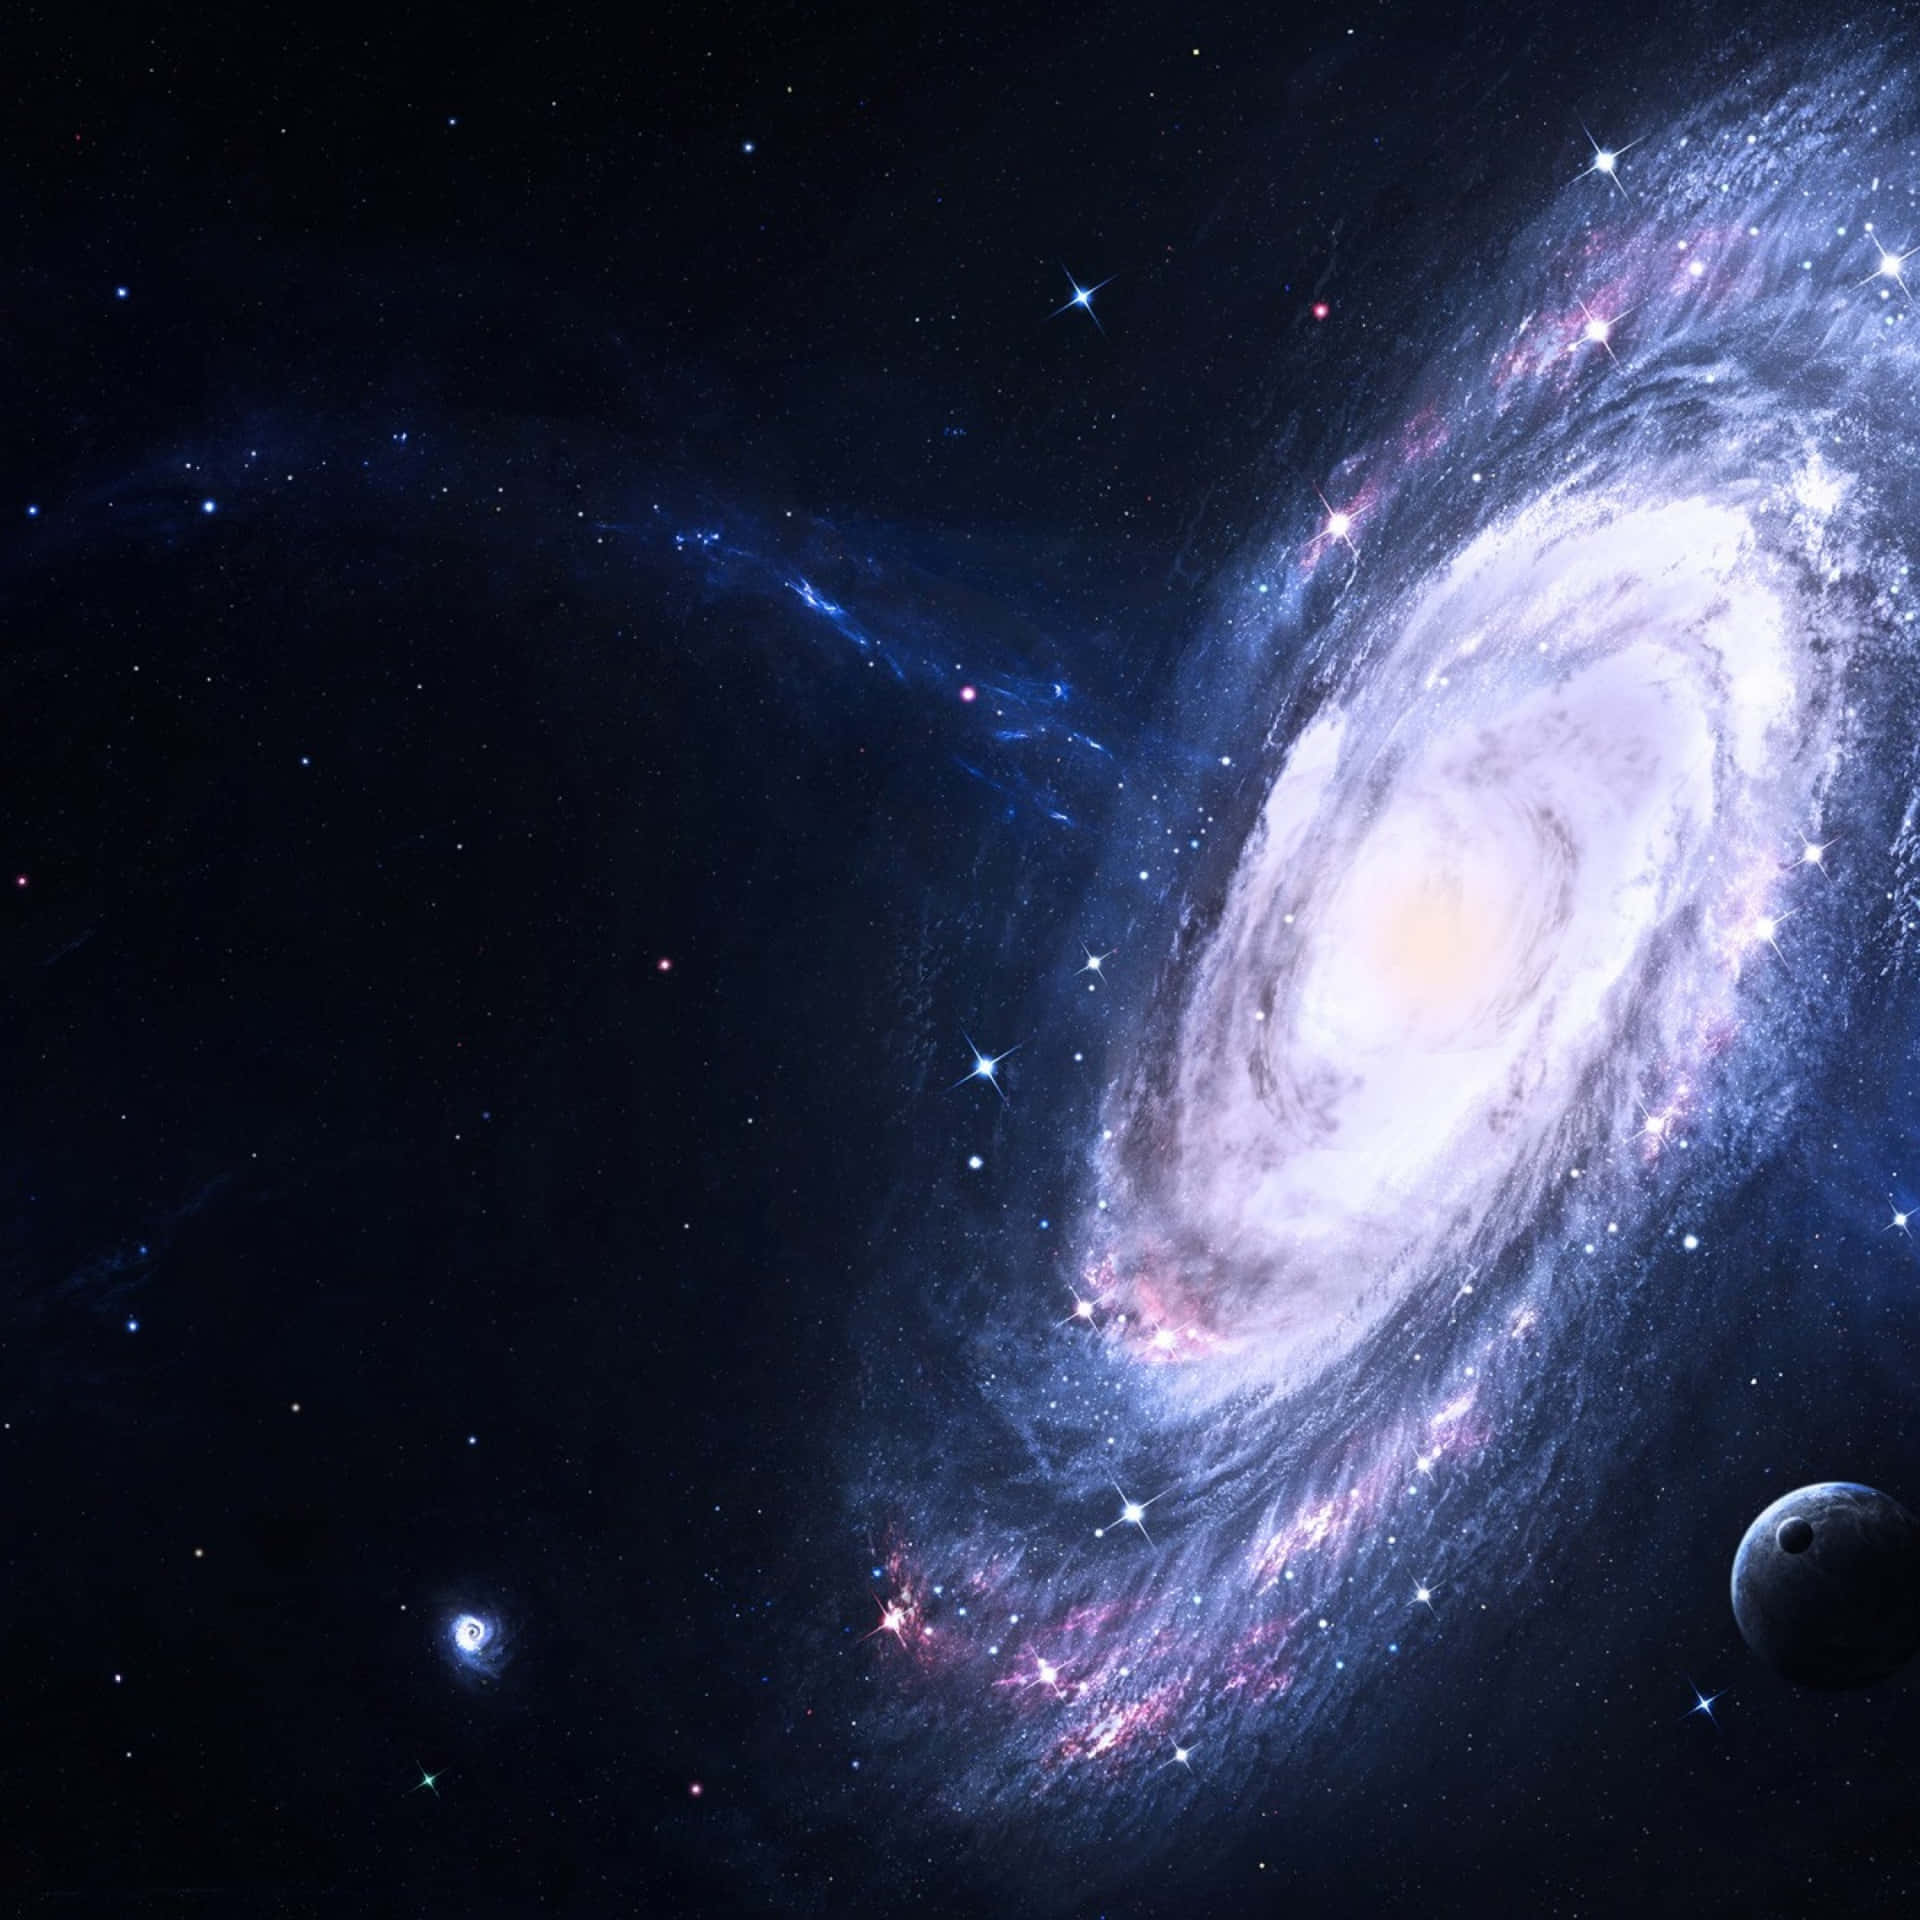 A Galaxy With A Spiral Galaxy In The Background Wallpaper